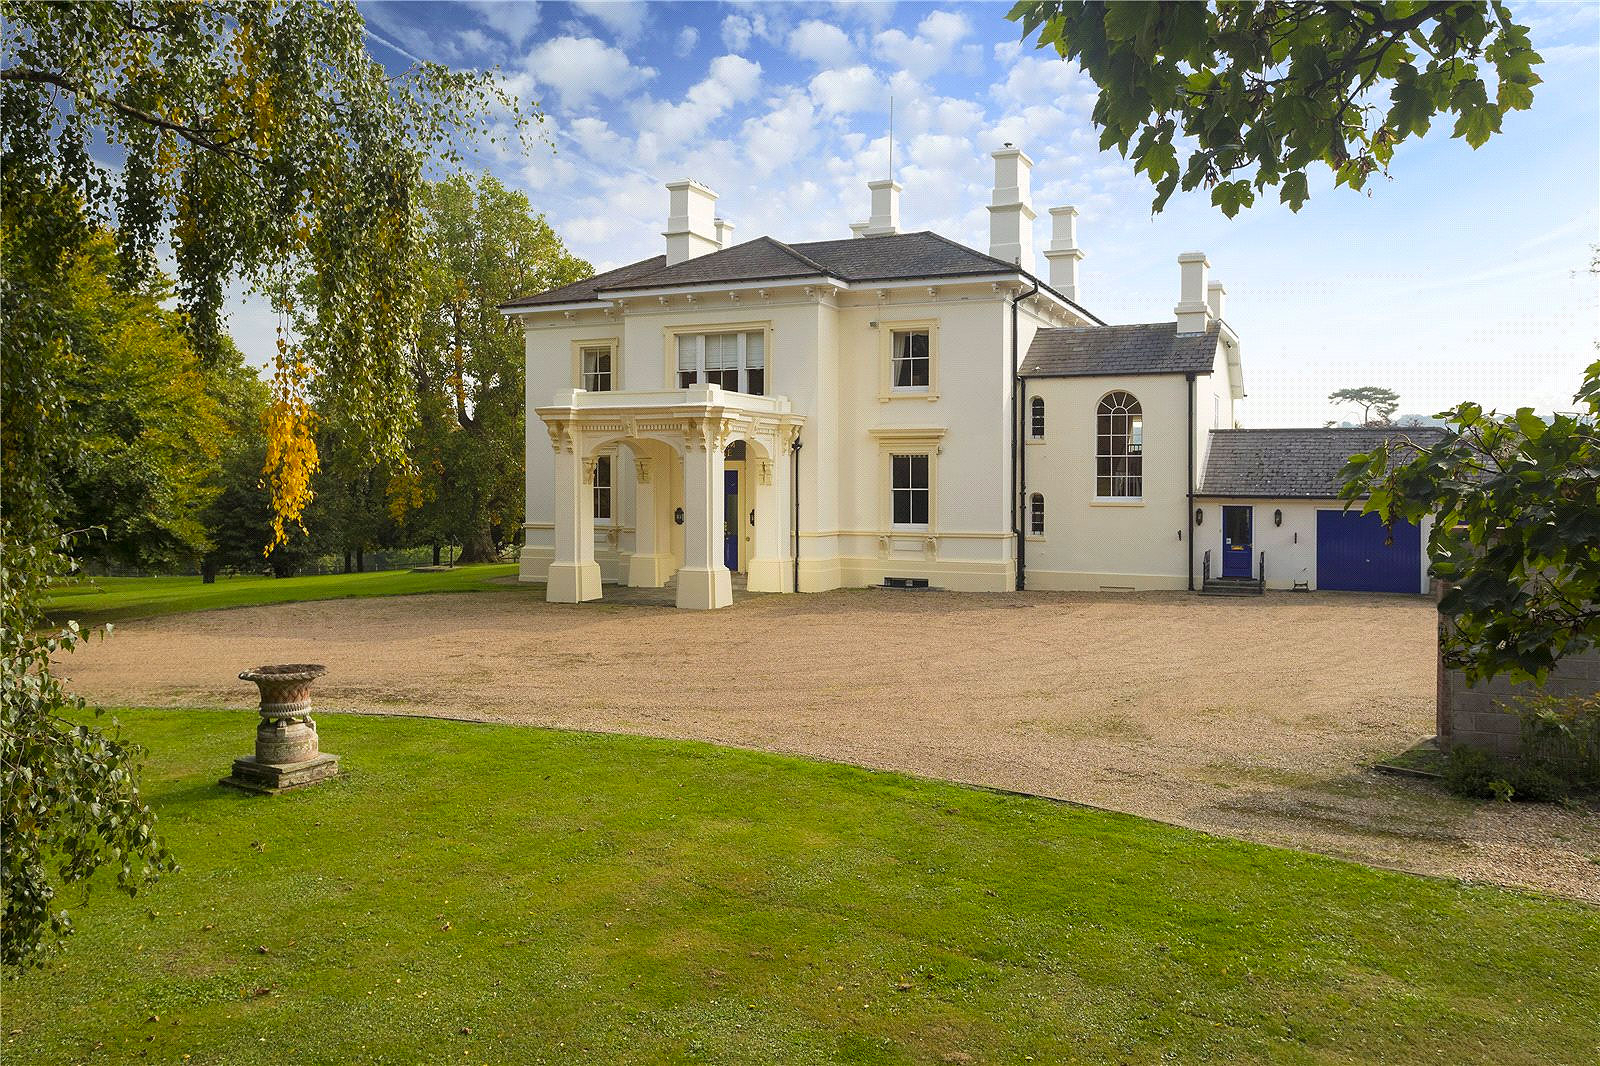 10 Outstanding Country Houses For Sale Today, As Seen In Country Life